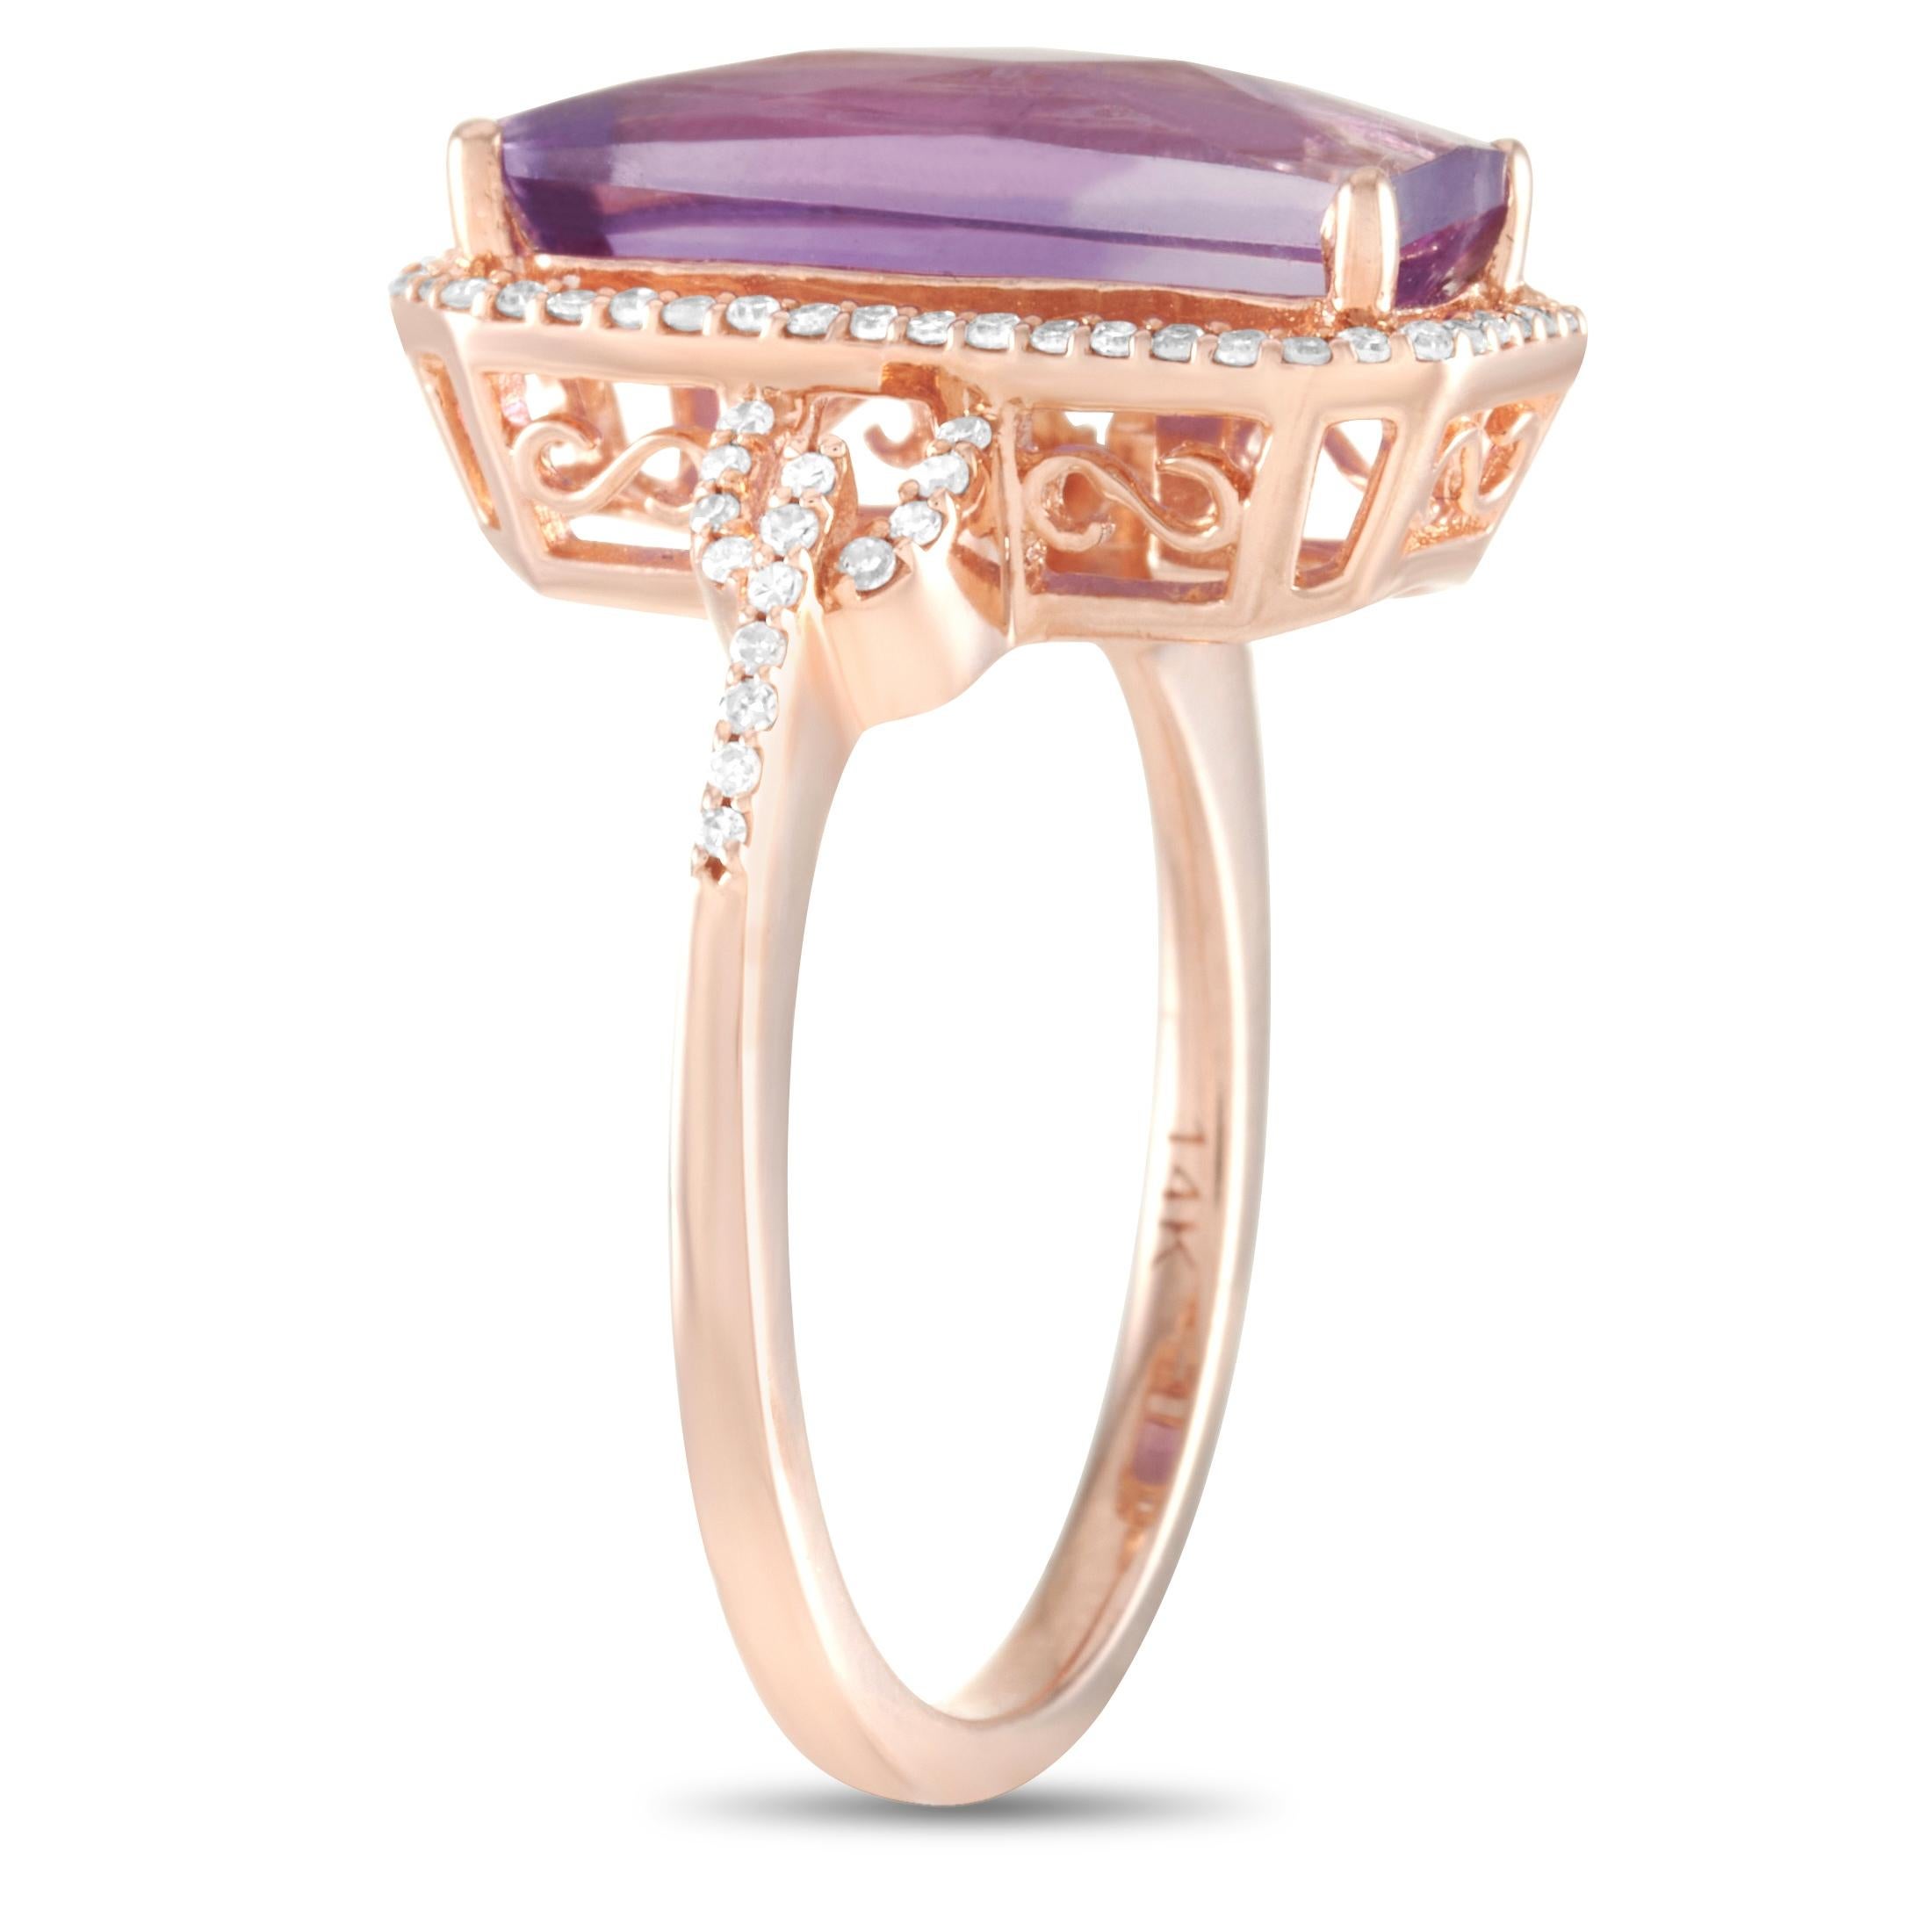 This LB Exclusive ring is made of 14K rose gold and embellished with a rectangular amethyst and a total of 0.23 carats of diamonds. The ring weighs 4.3 grams and boasts band thickness of 2 mm and top height of 6 mm, while top dimensions measure 17